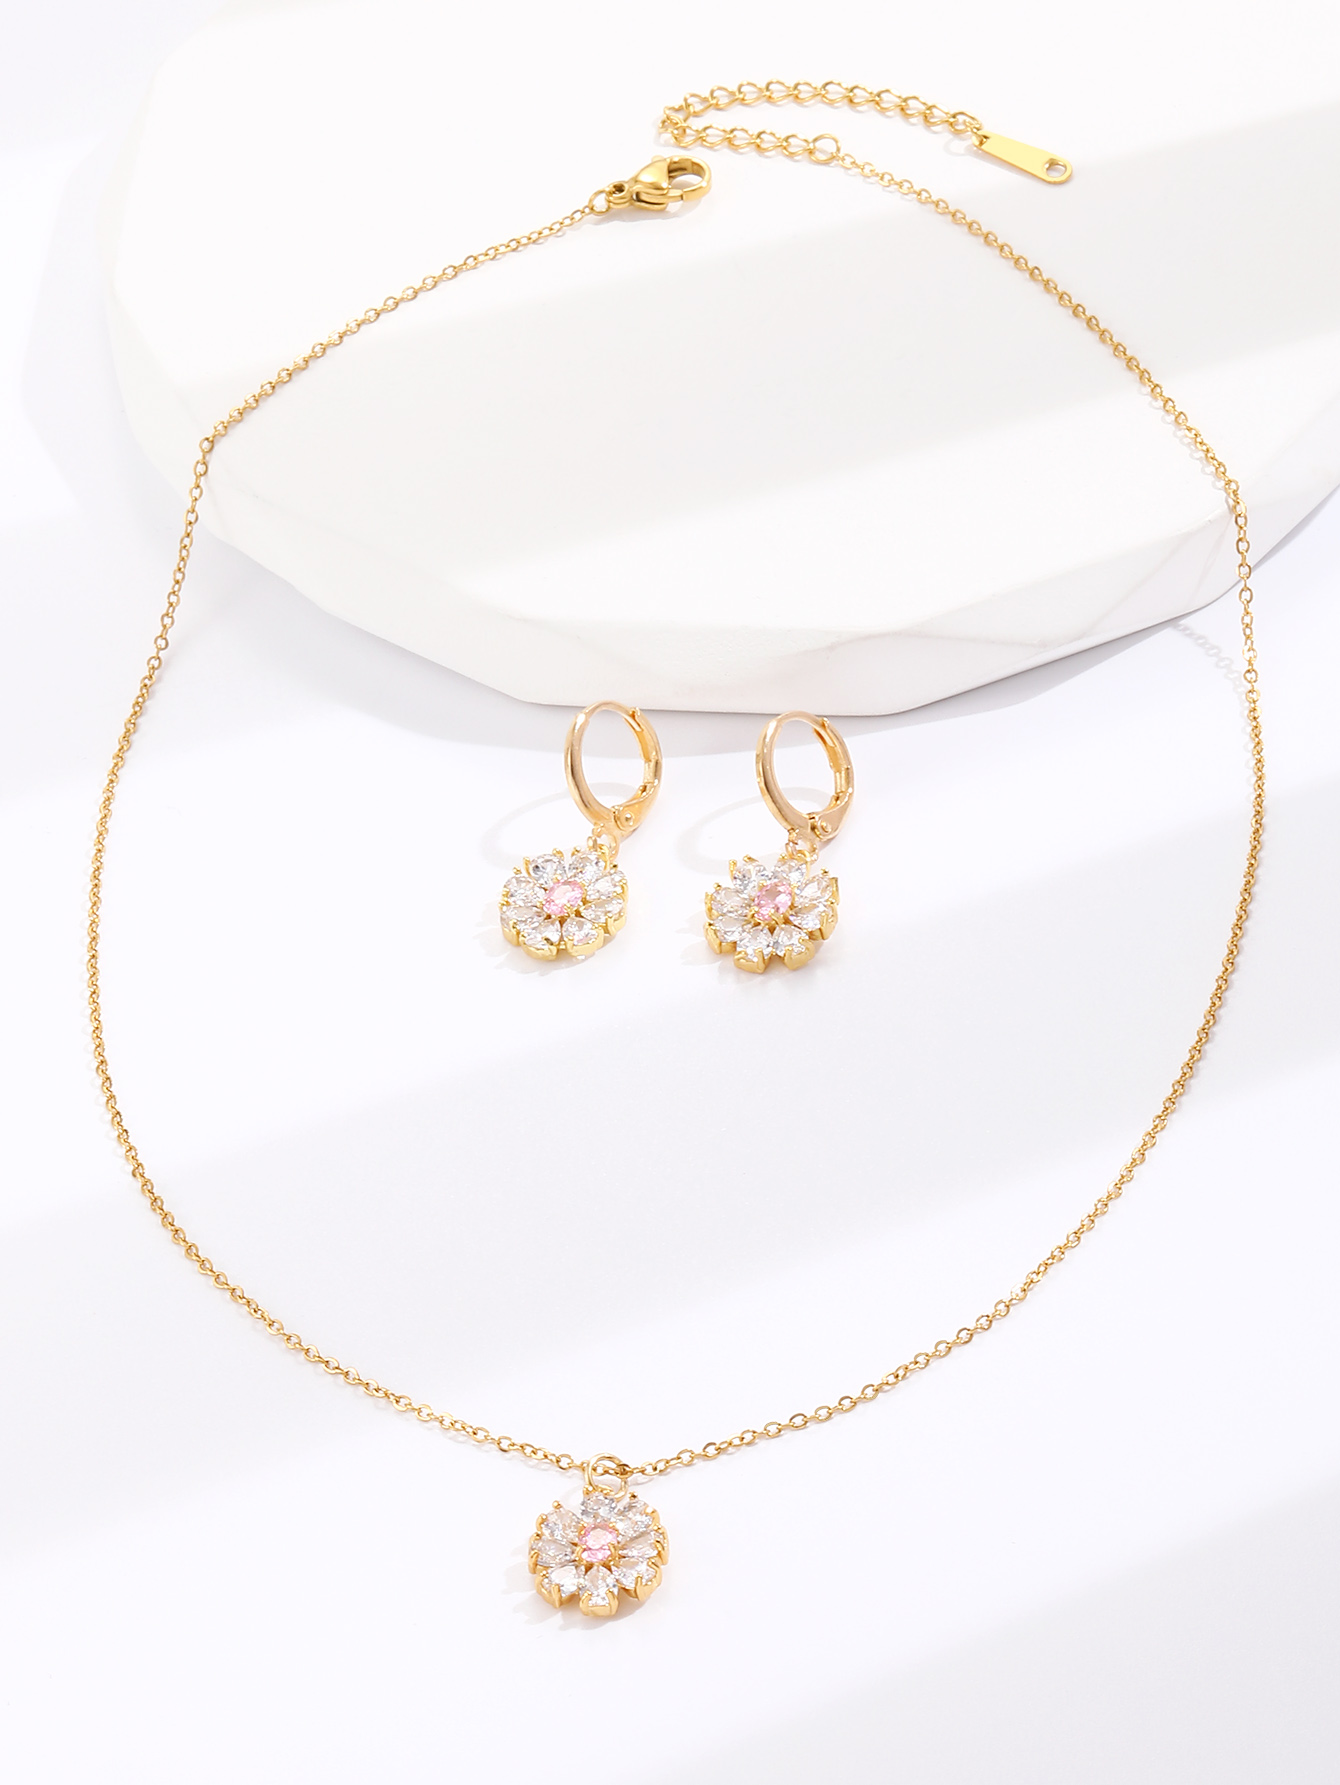 GCJ385 Pink Flower Necklace and Earrings set (2)